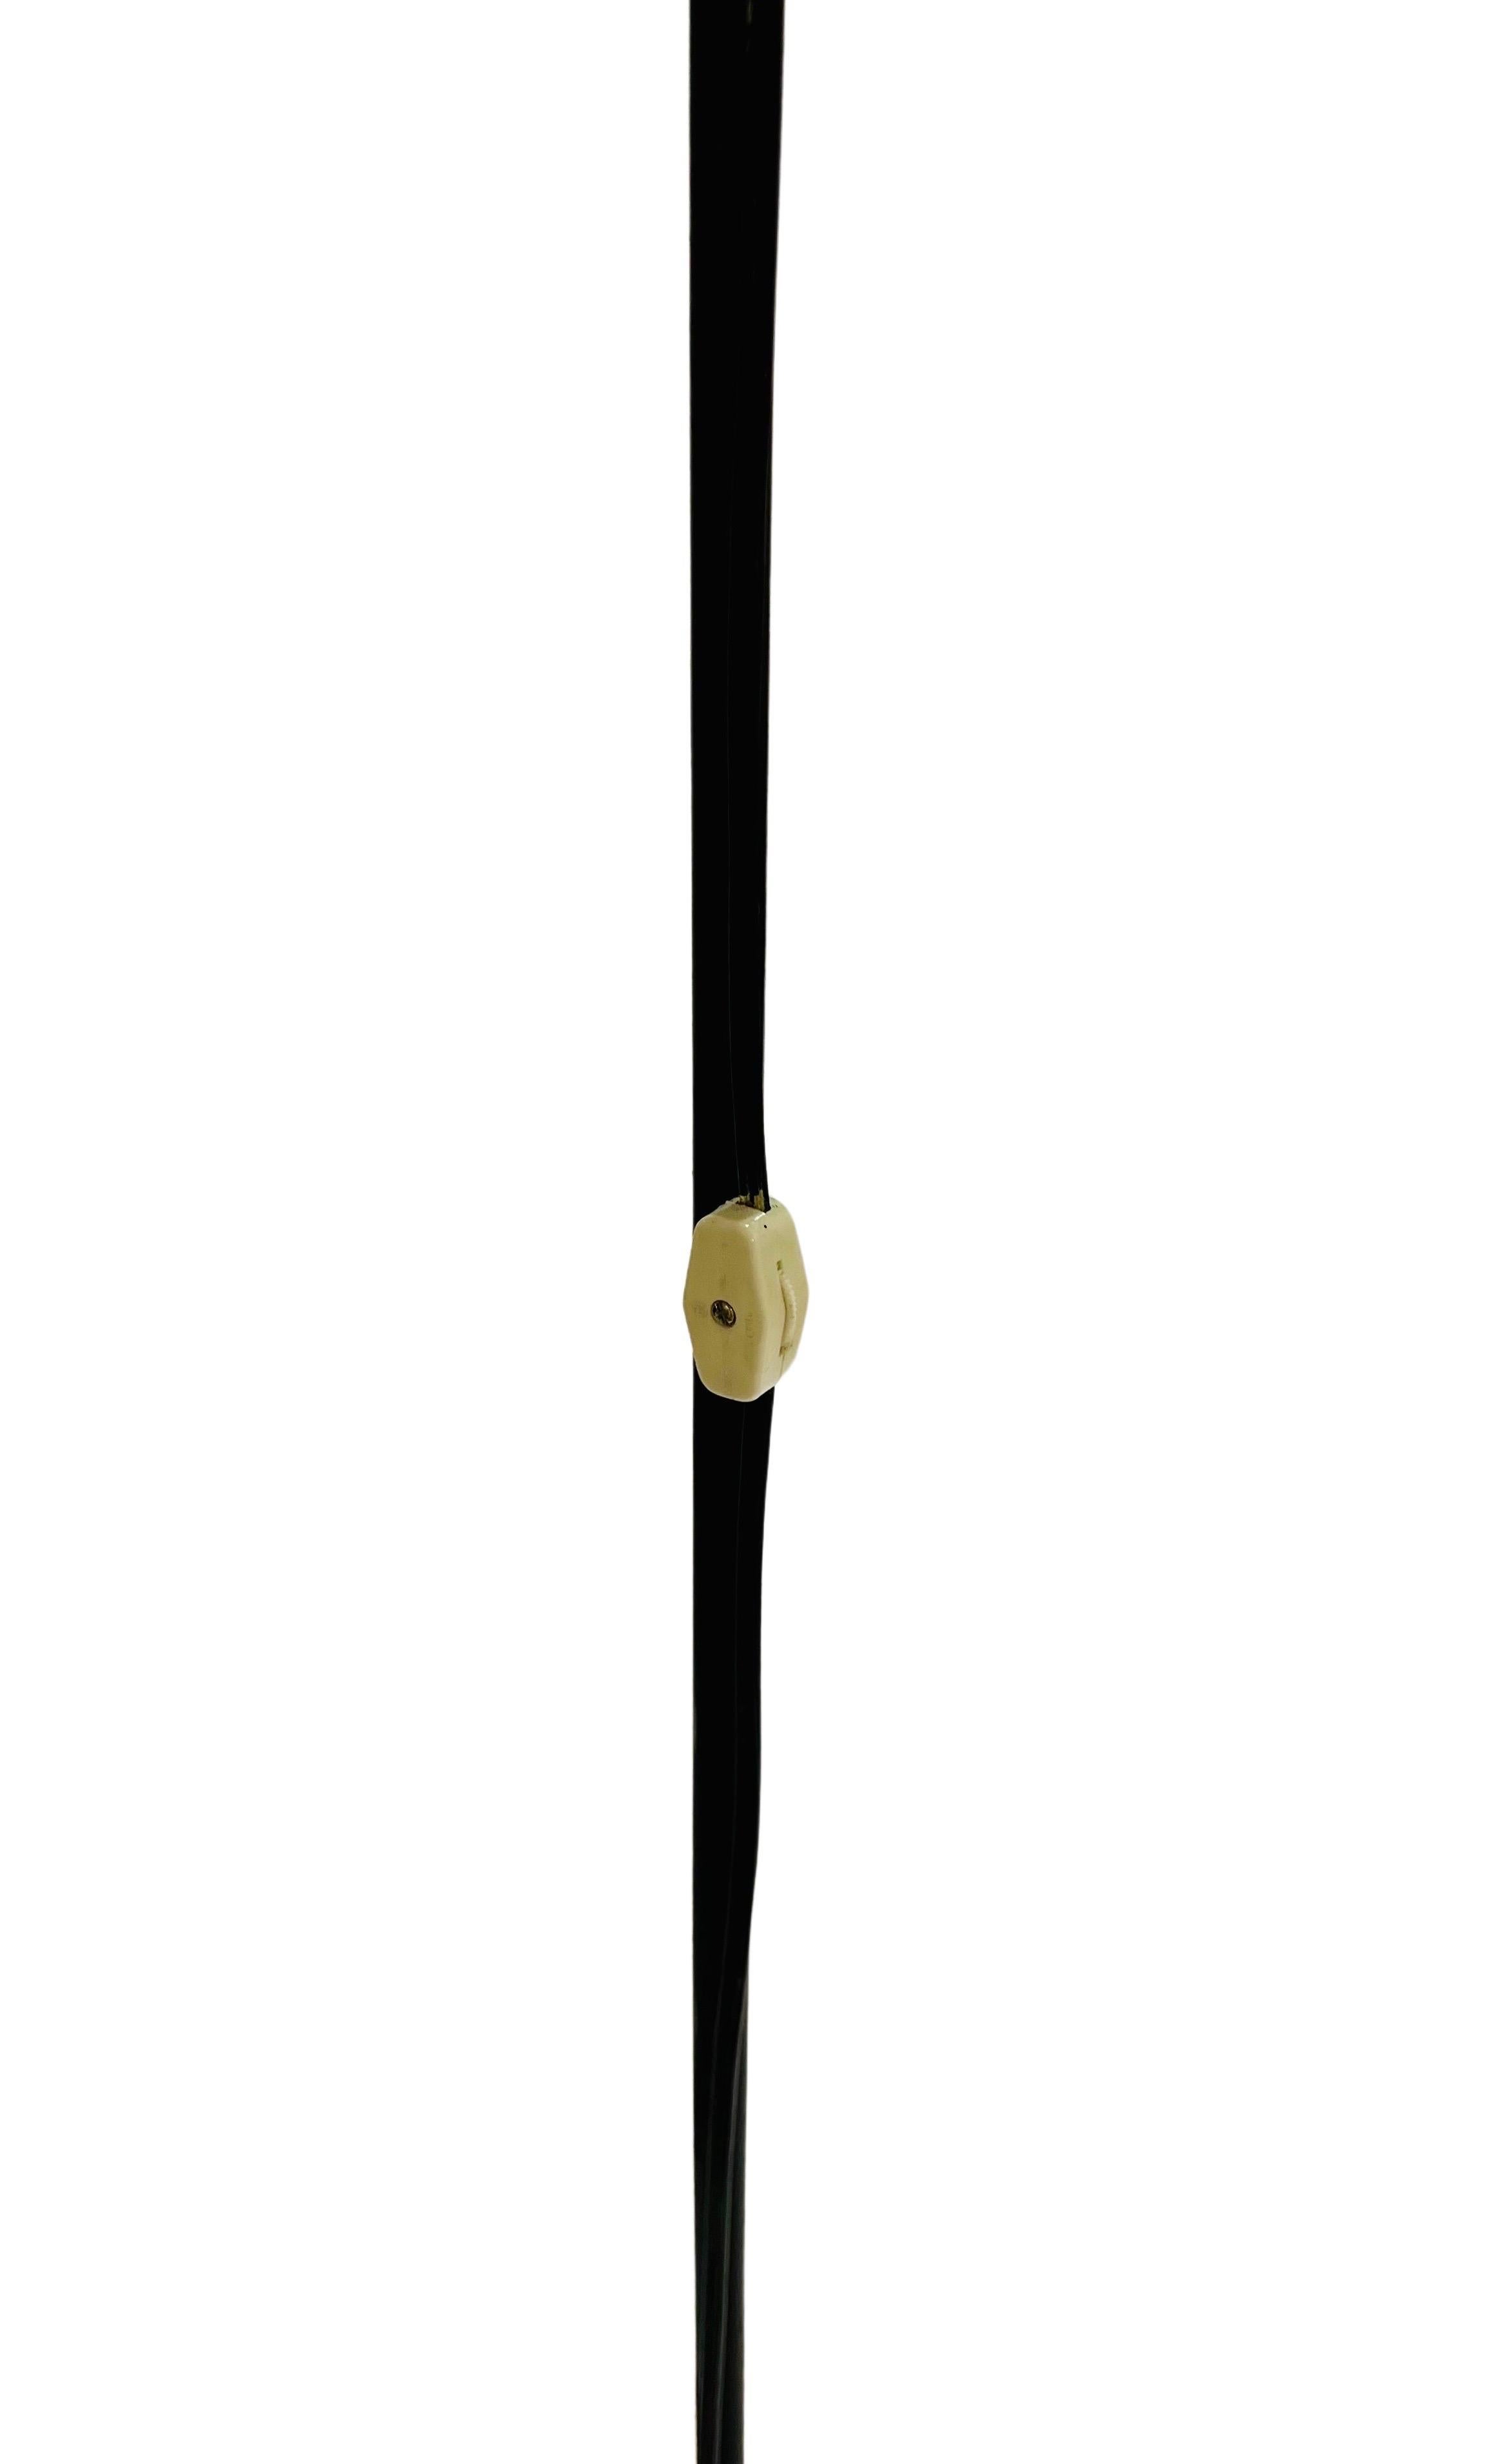 Antique Handcrafted Wrought Iron Floor Lamp with Metal Shade, circa 1910 For Sale 5